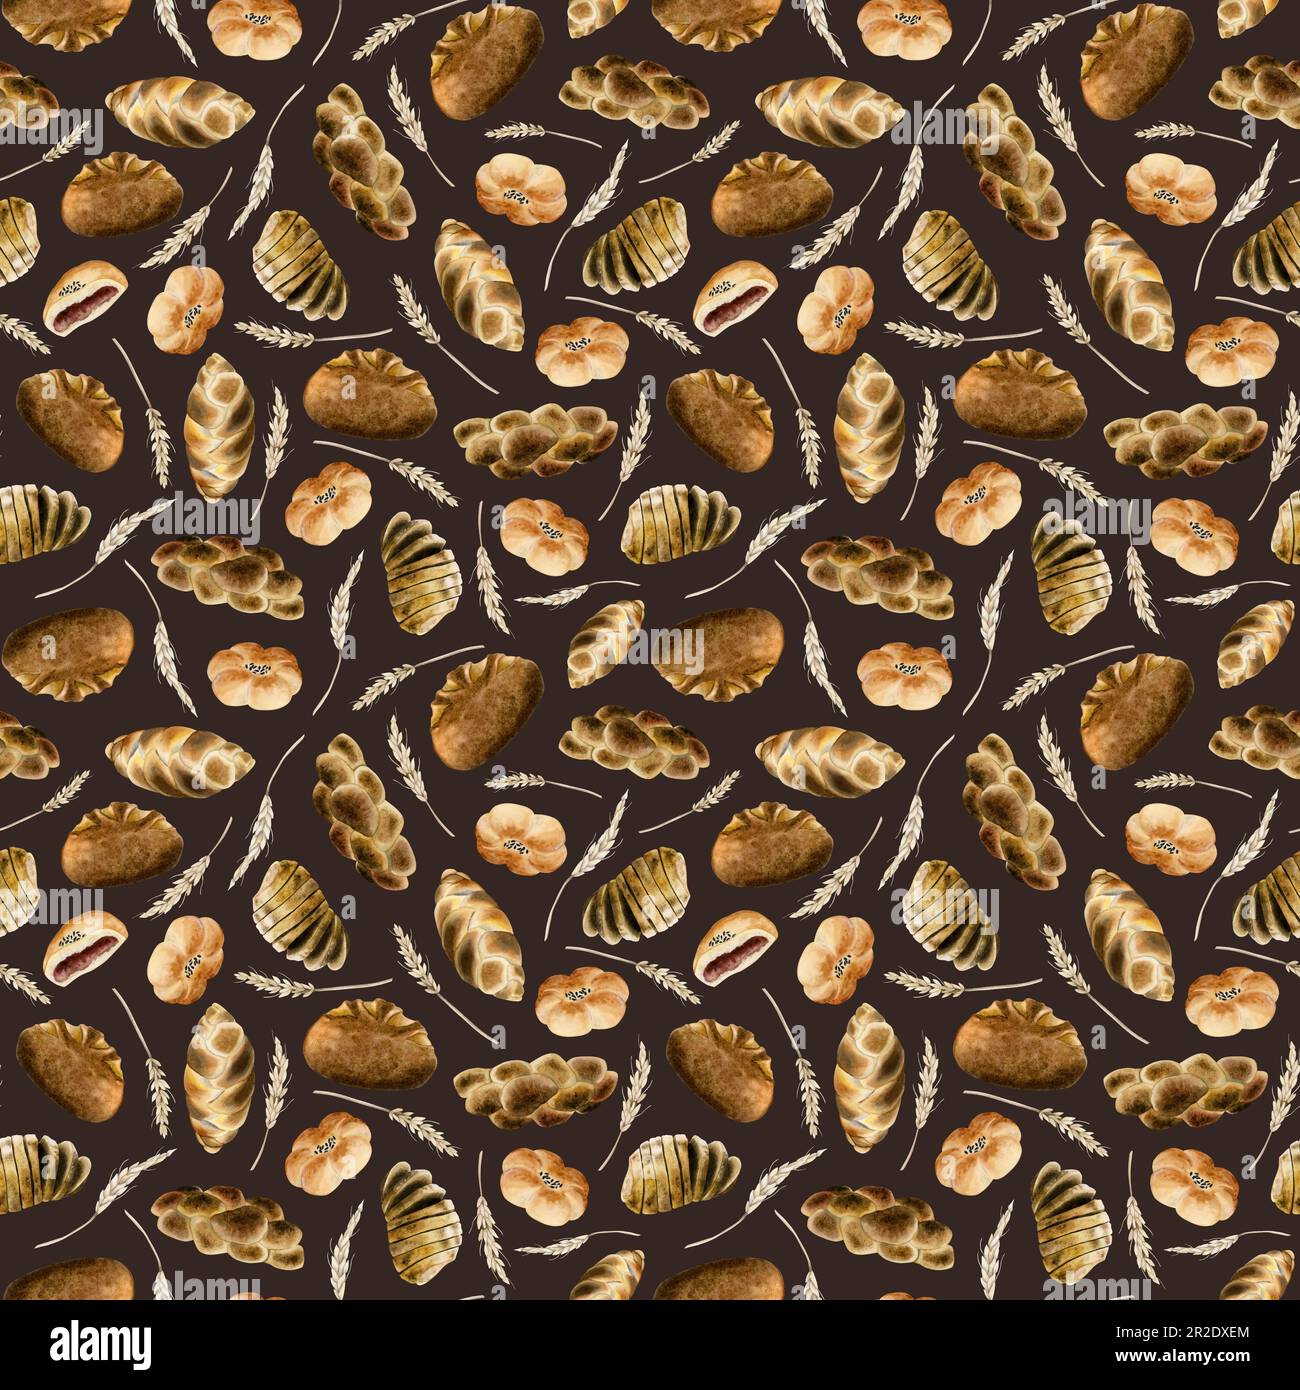 Dark brown fresh bread and sweet buns seamless pattern. Various types of bakery. Organic rural pastries products, loafs, challah with ears of wheat wa Stock Photo